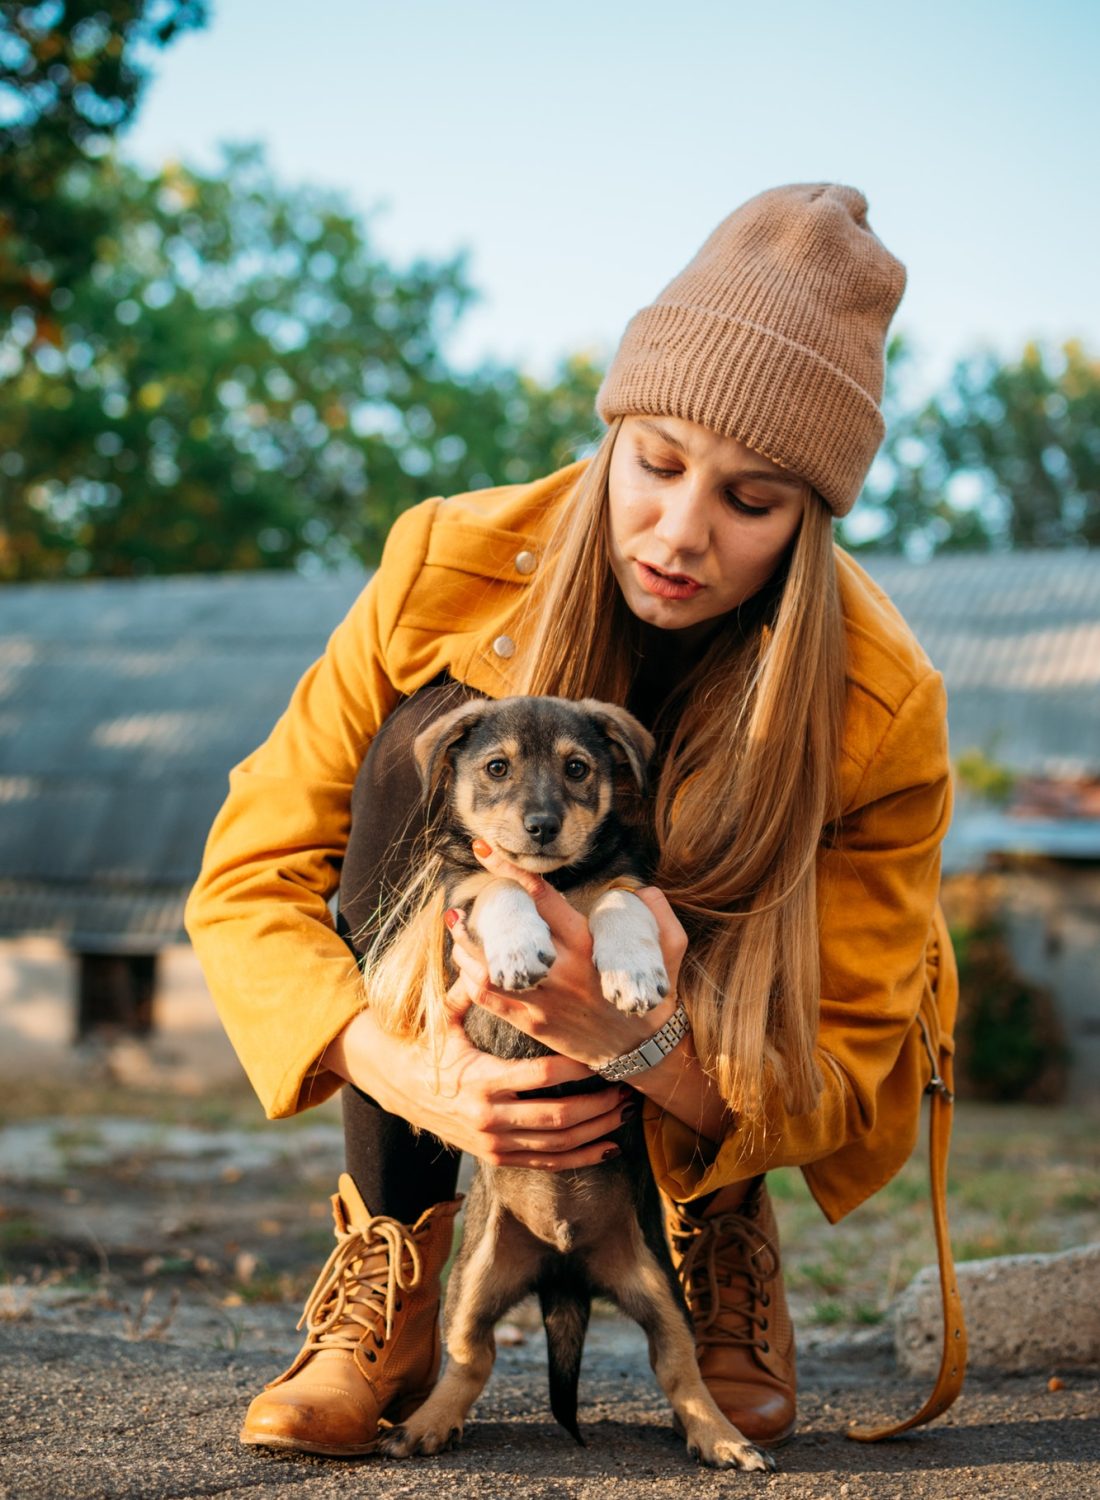 woman-volunteer-meeting-homeless-dog-puppies-in-fall-nature-background-pet-love-caring-for-pets.jpg